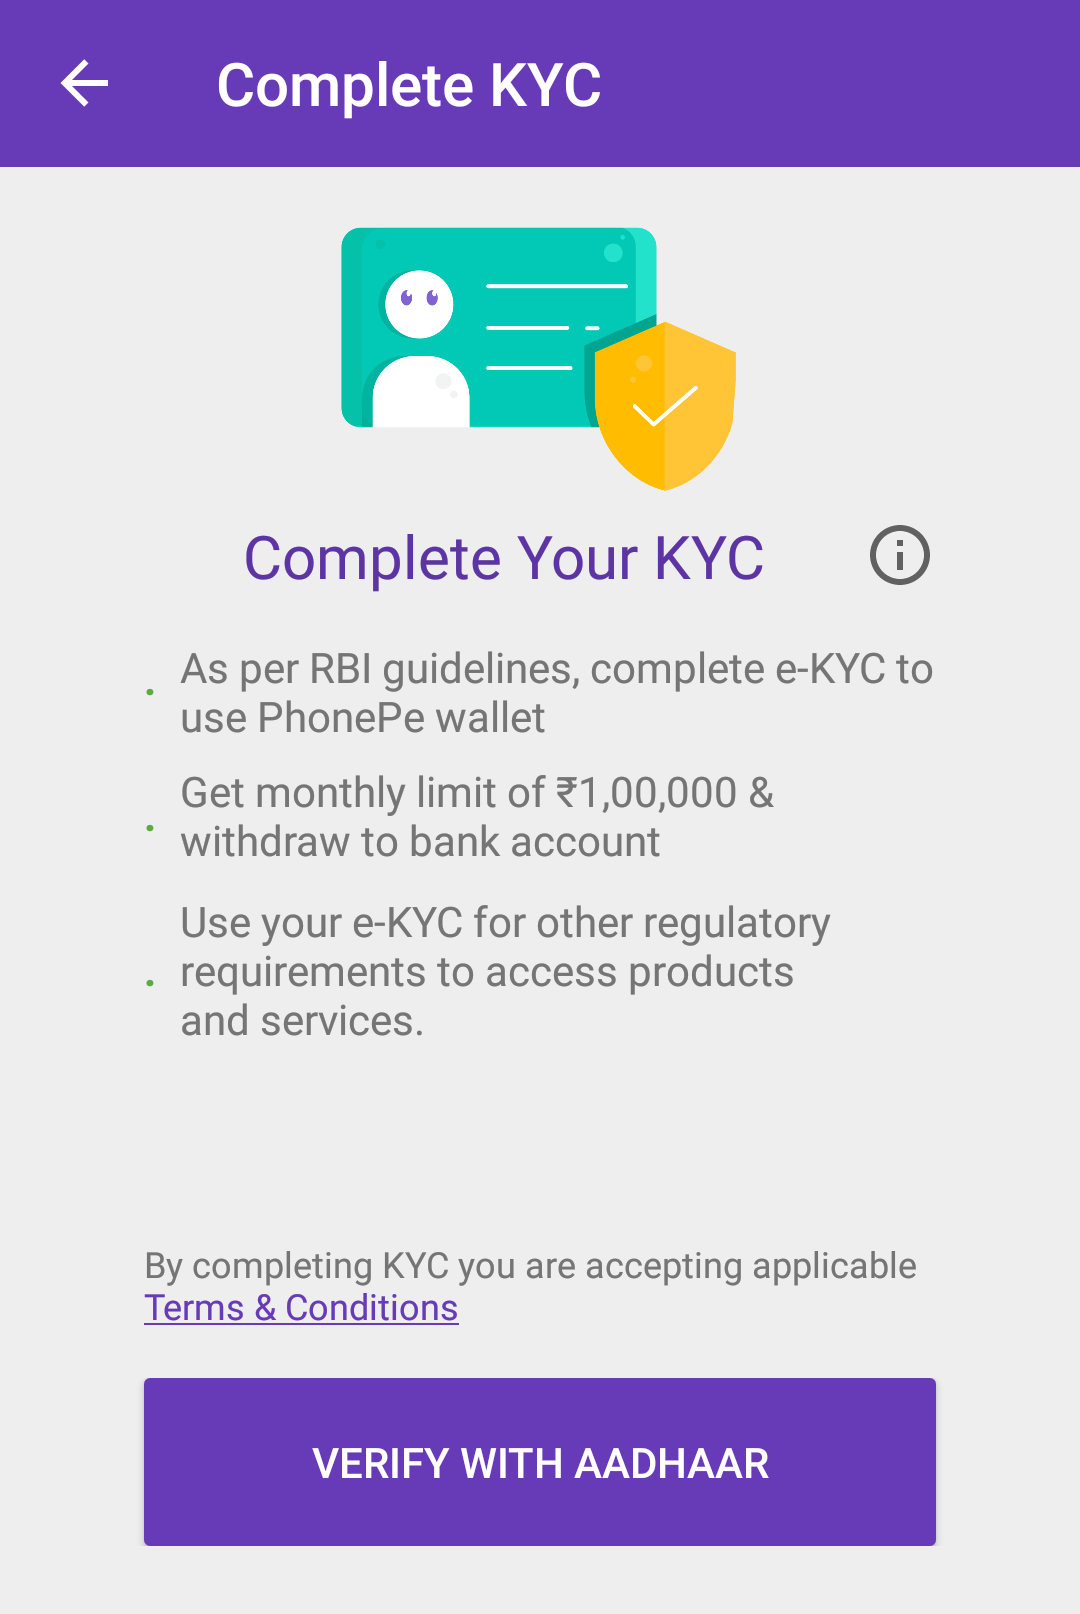 Complete Your KYC